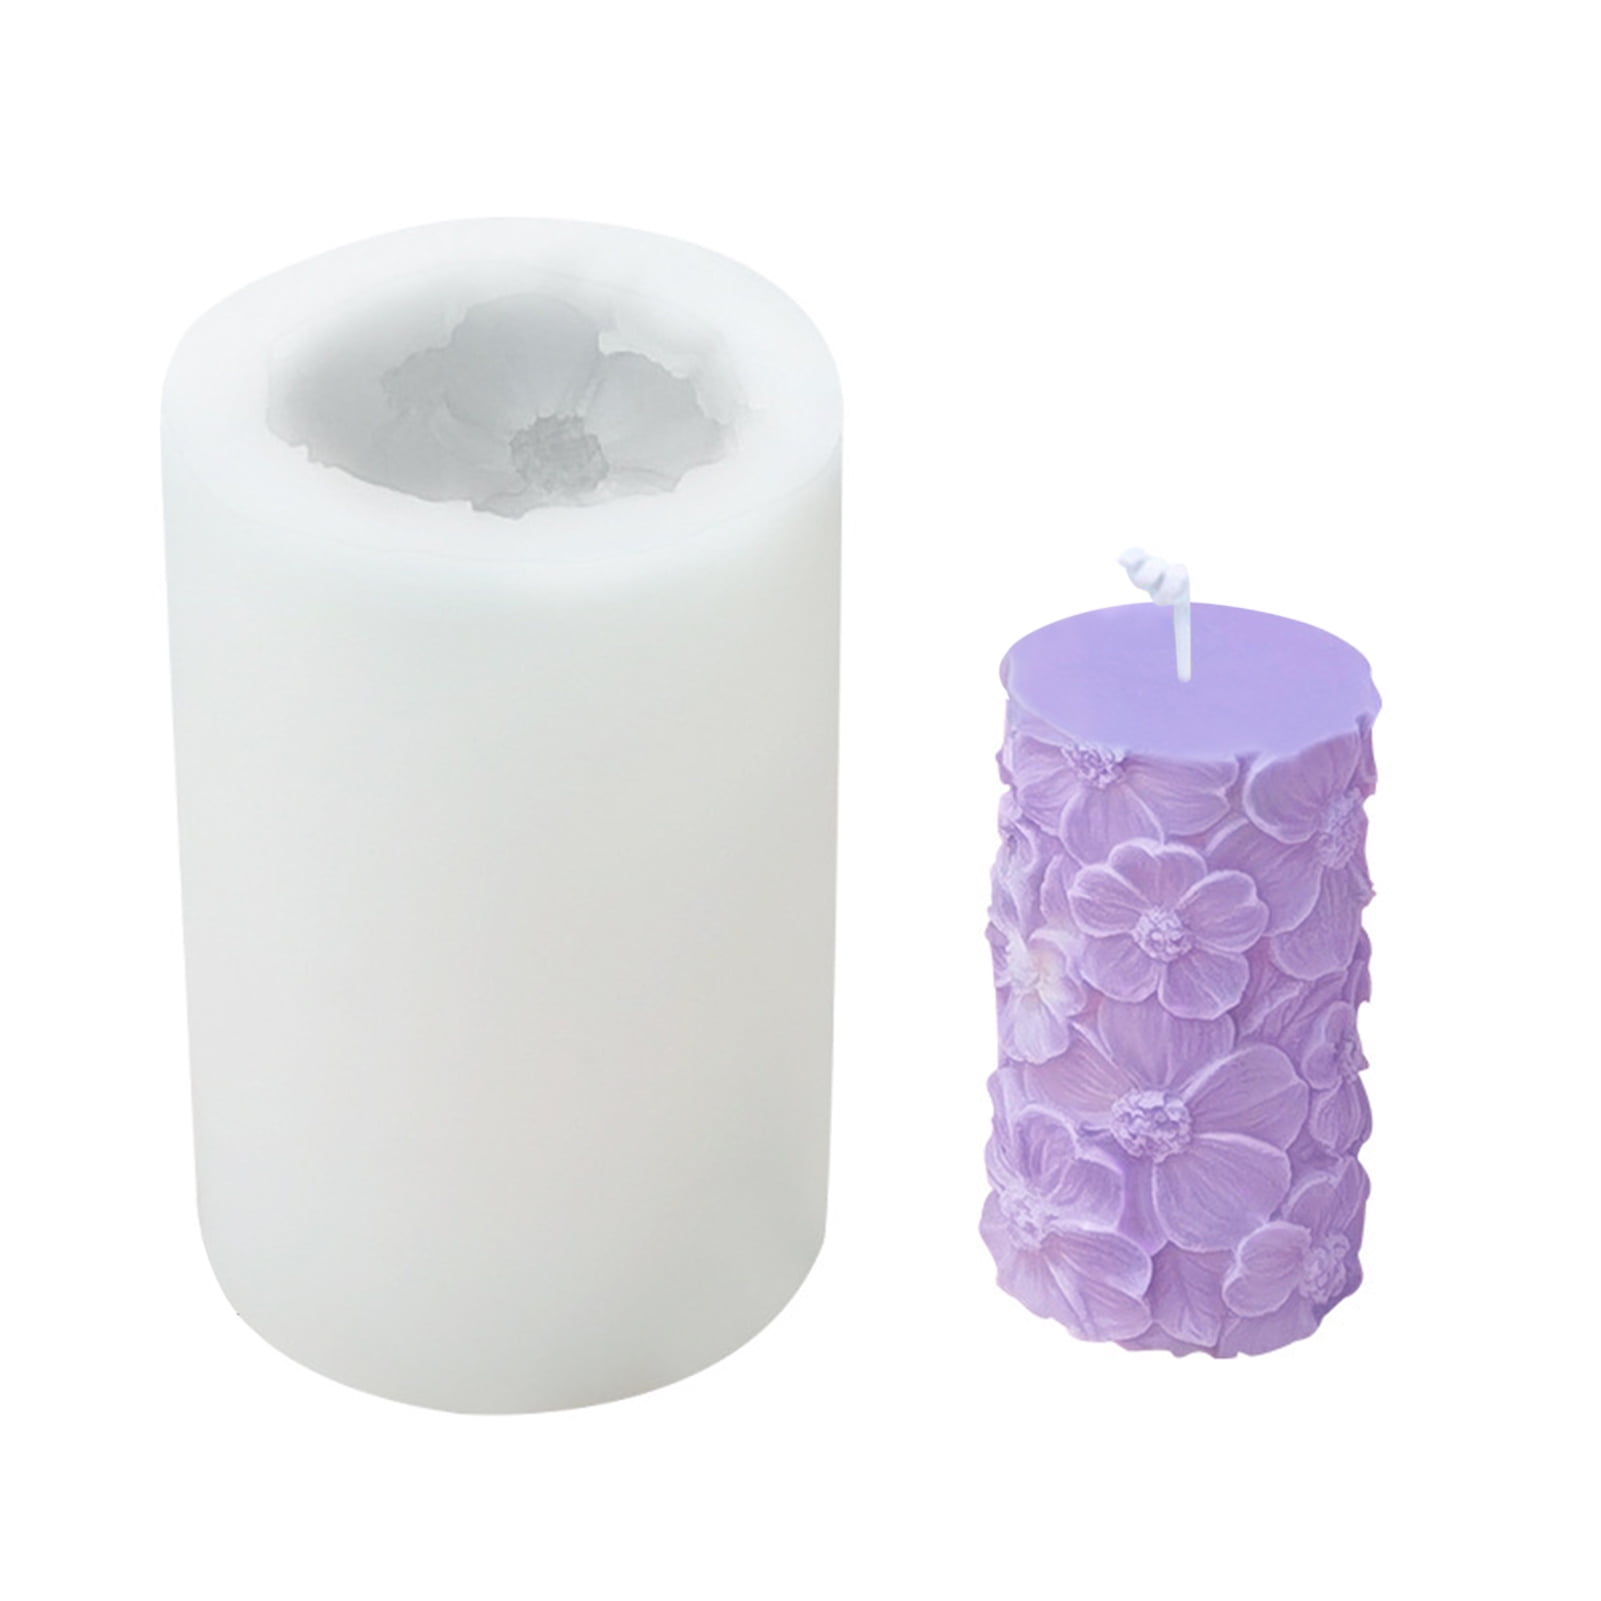 Soap Mold Flower Silicone Soap Making Mould Candle Mold DIY Handmade Mold 